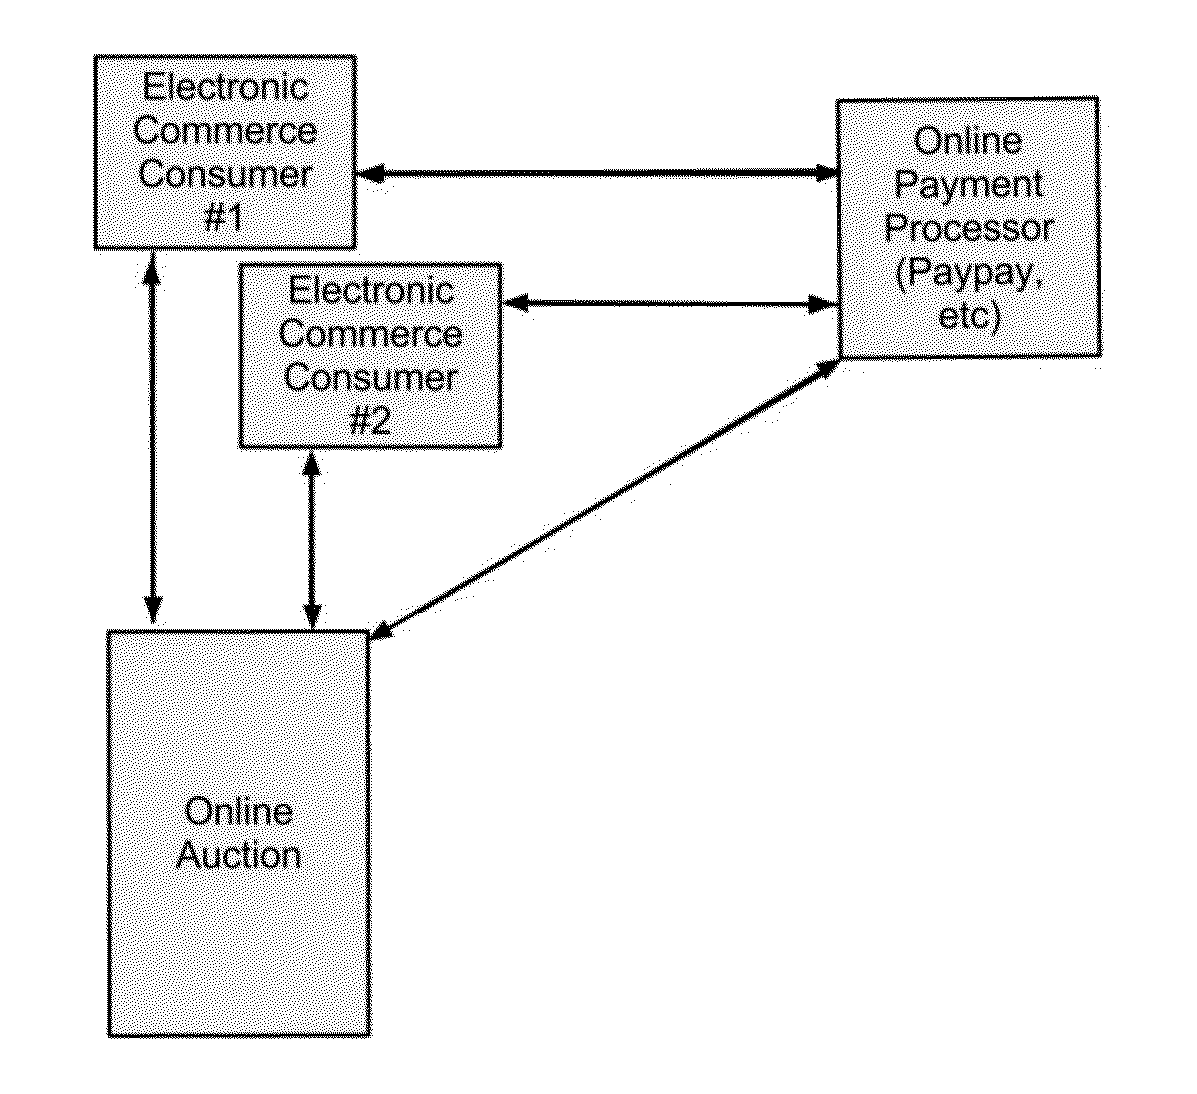 Systems and methods to process online monetary payments dependent on conditional triggers involving future events